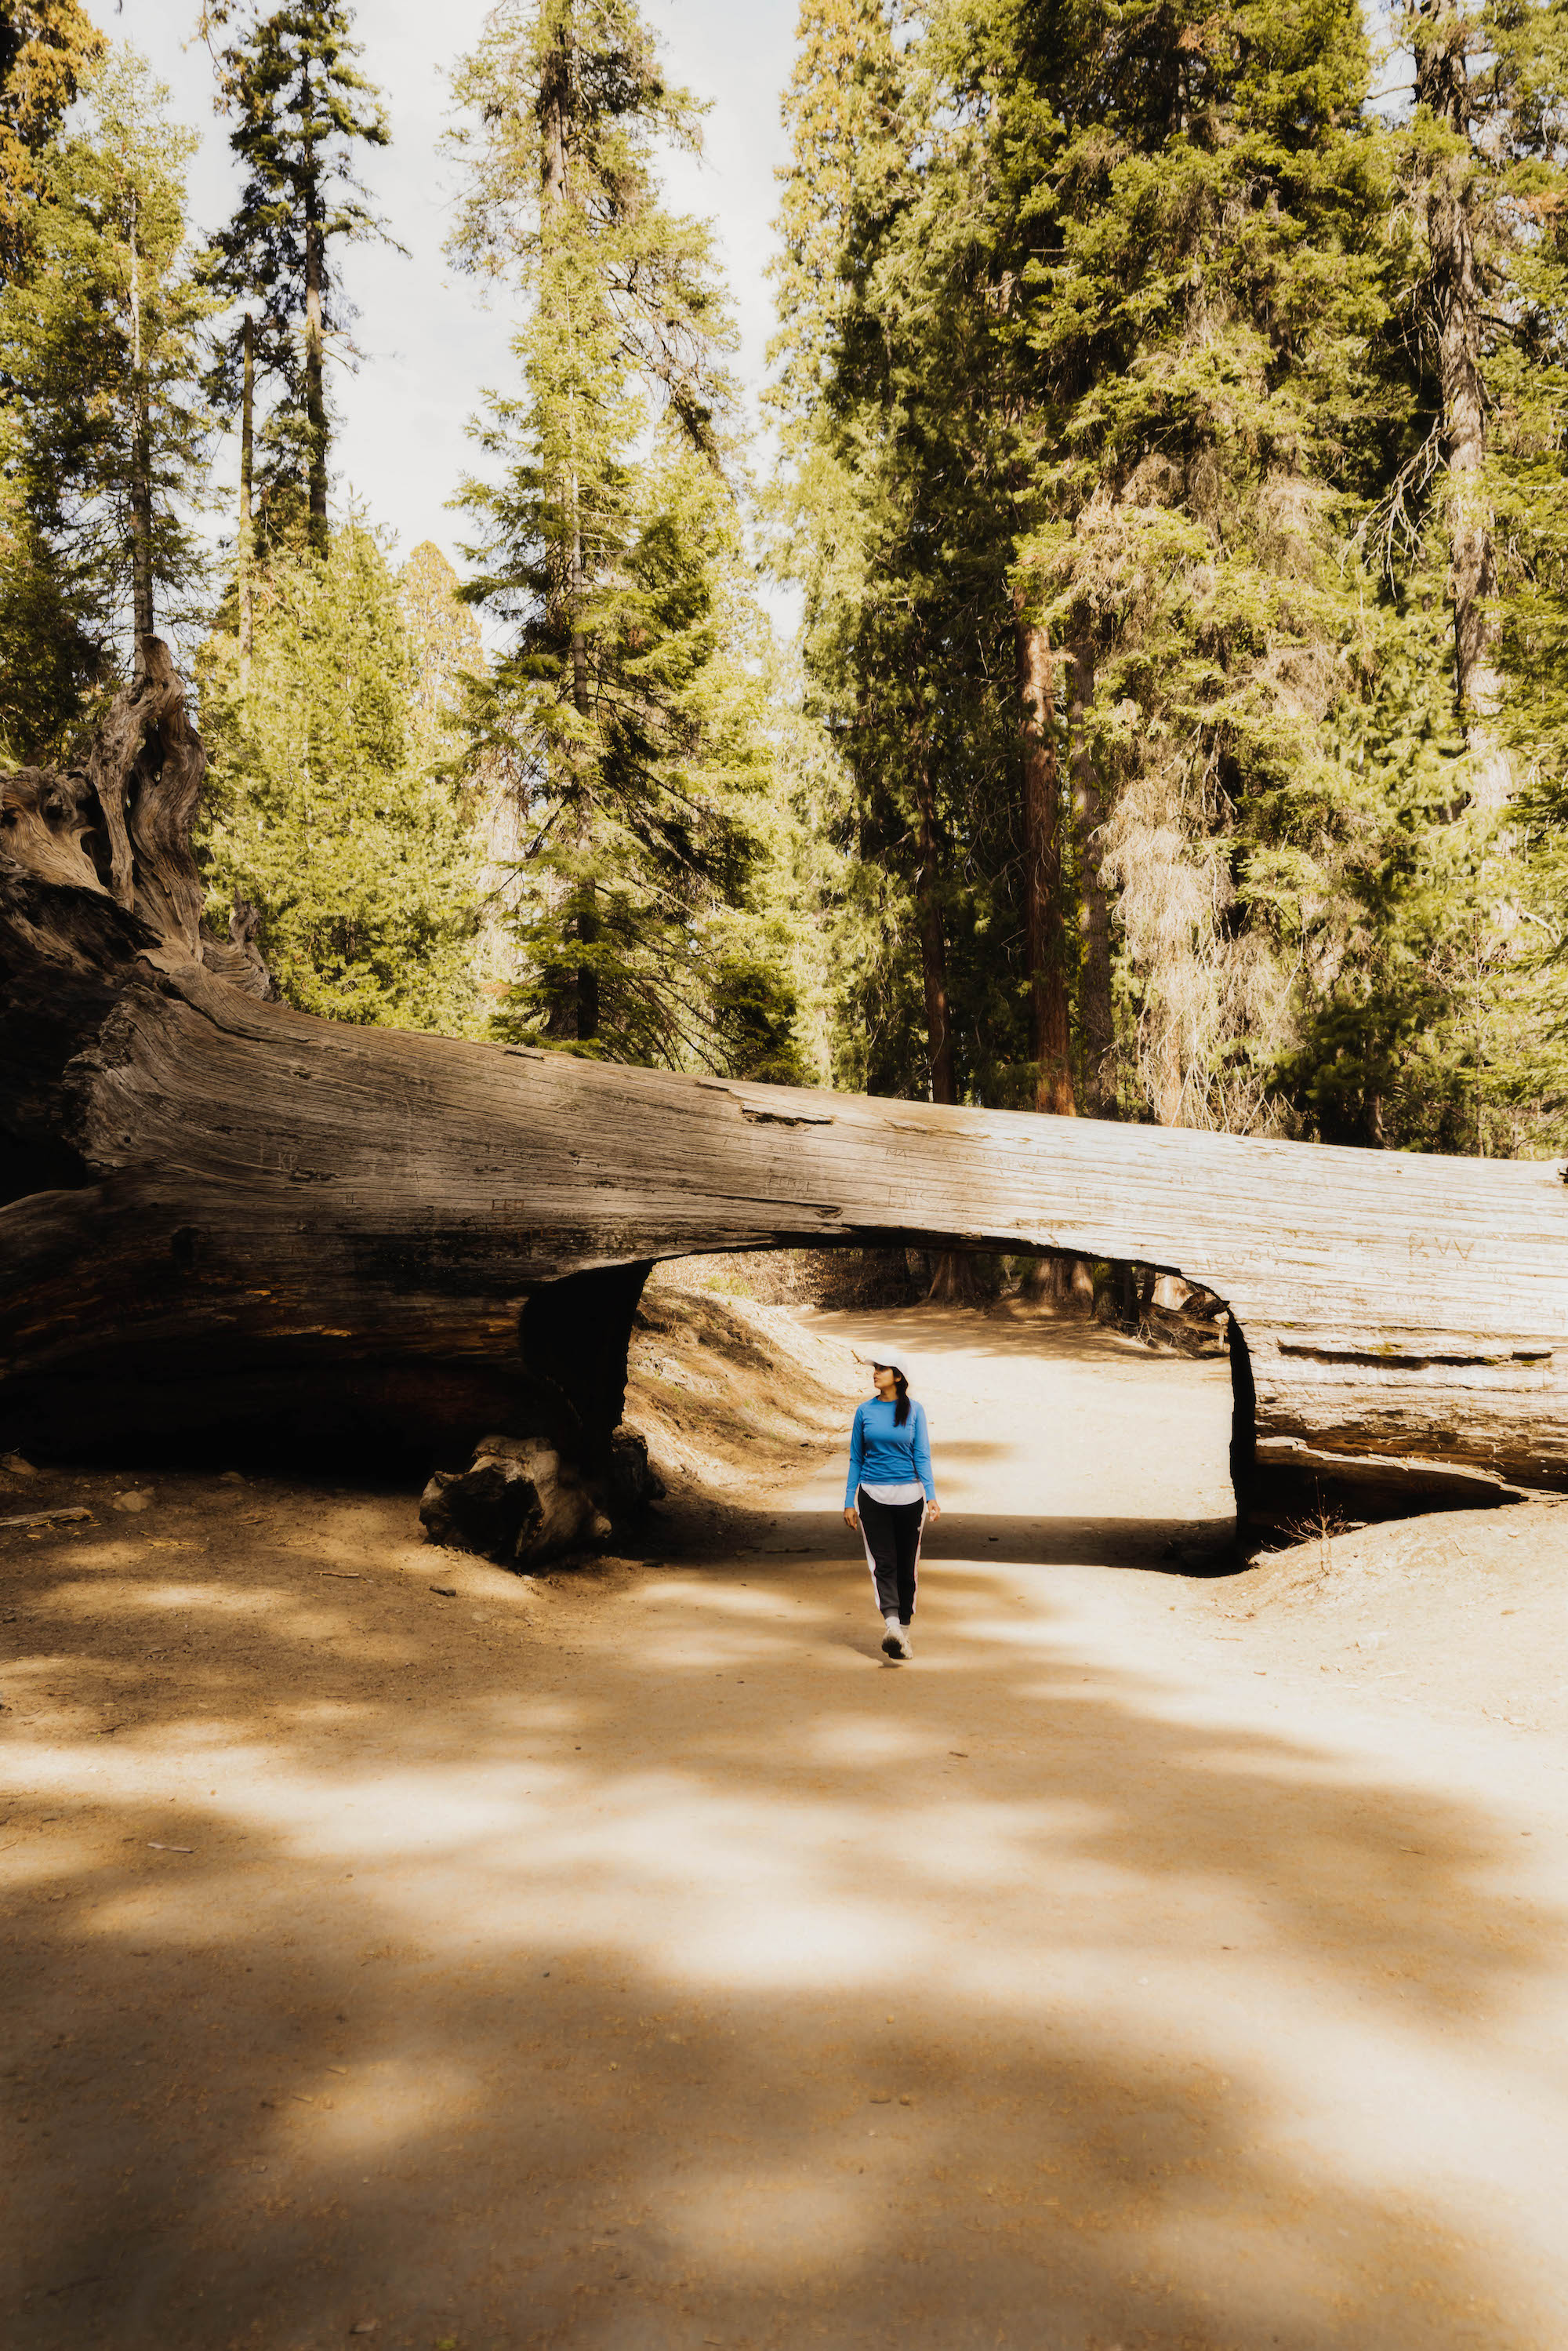 Add hiking to Tunnel Log in list of things to do in Sequoia National Park